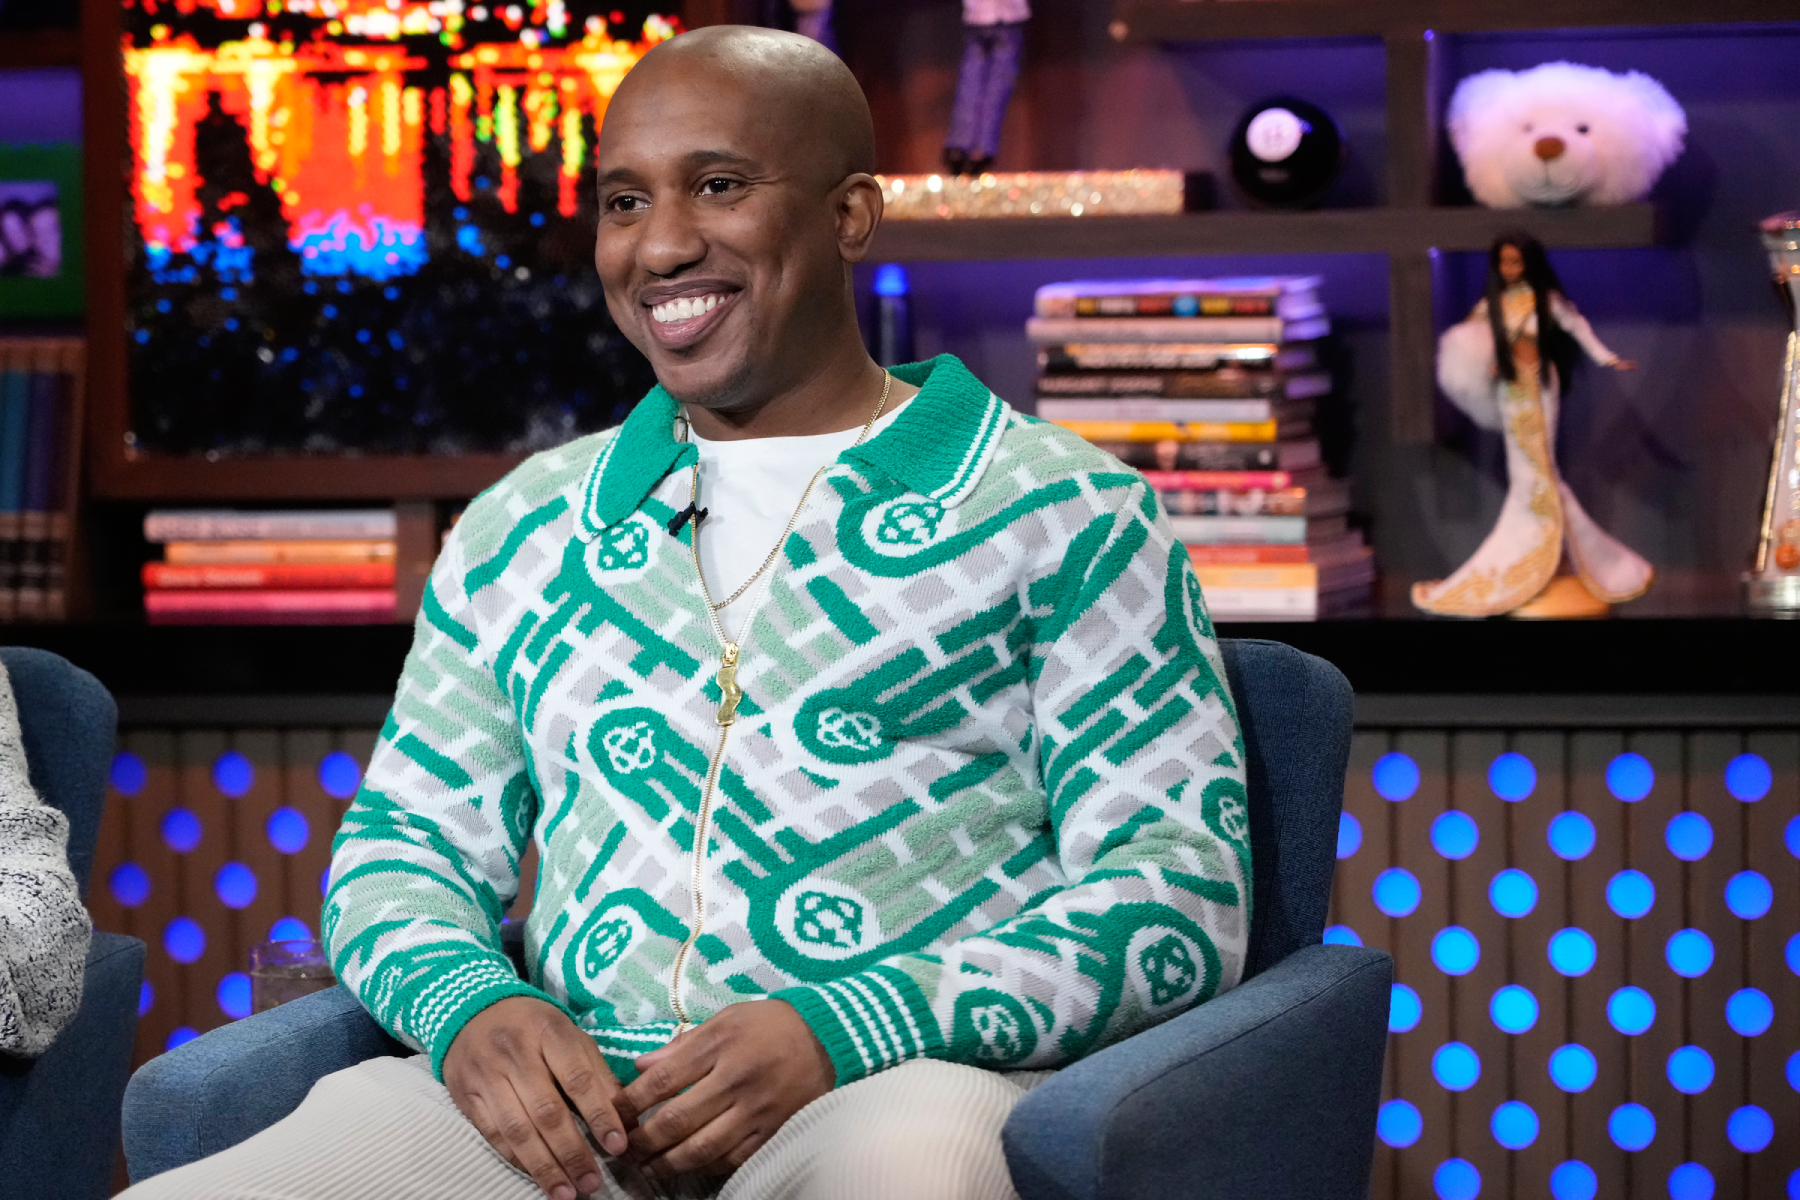 Who is Chris Redd dating?